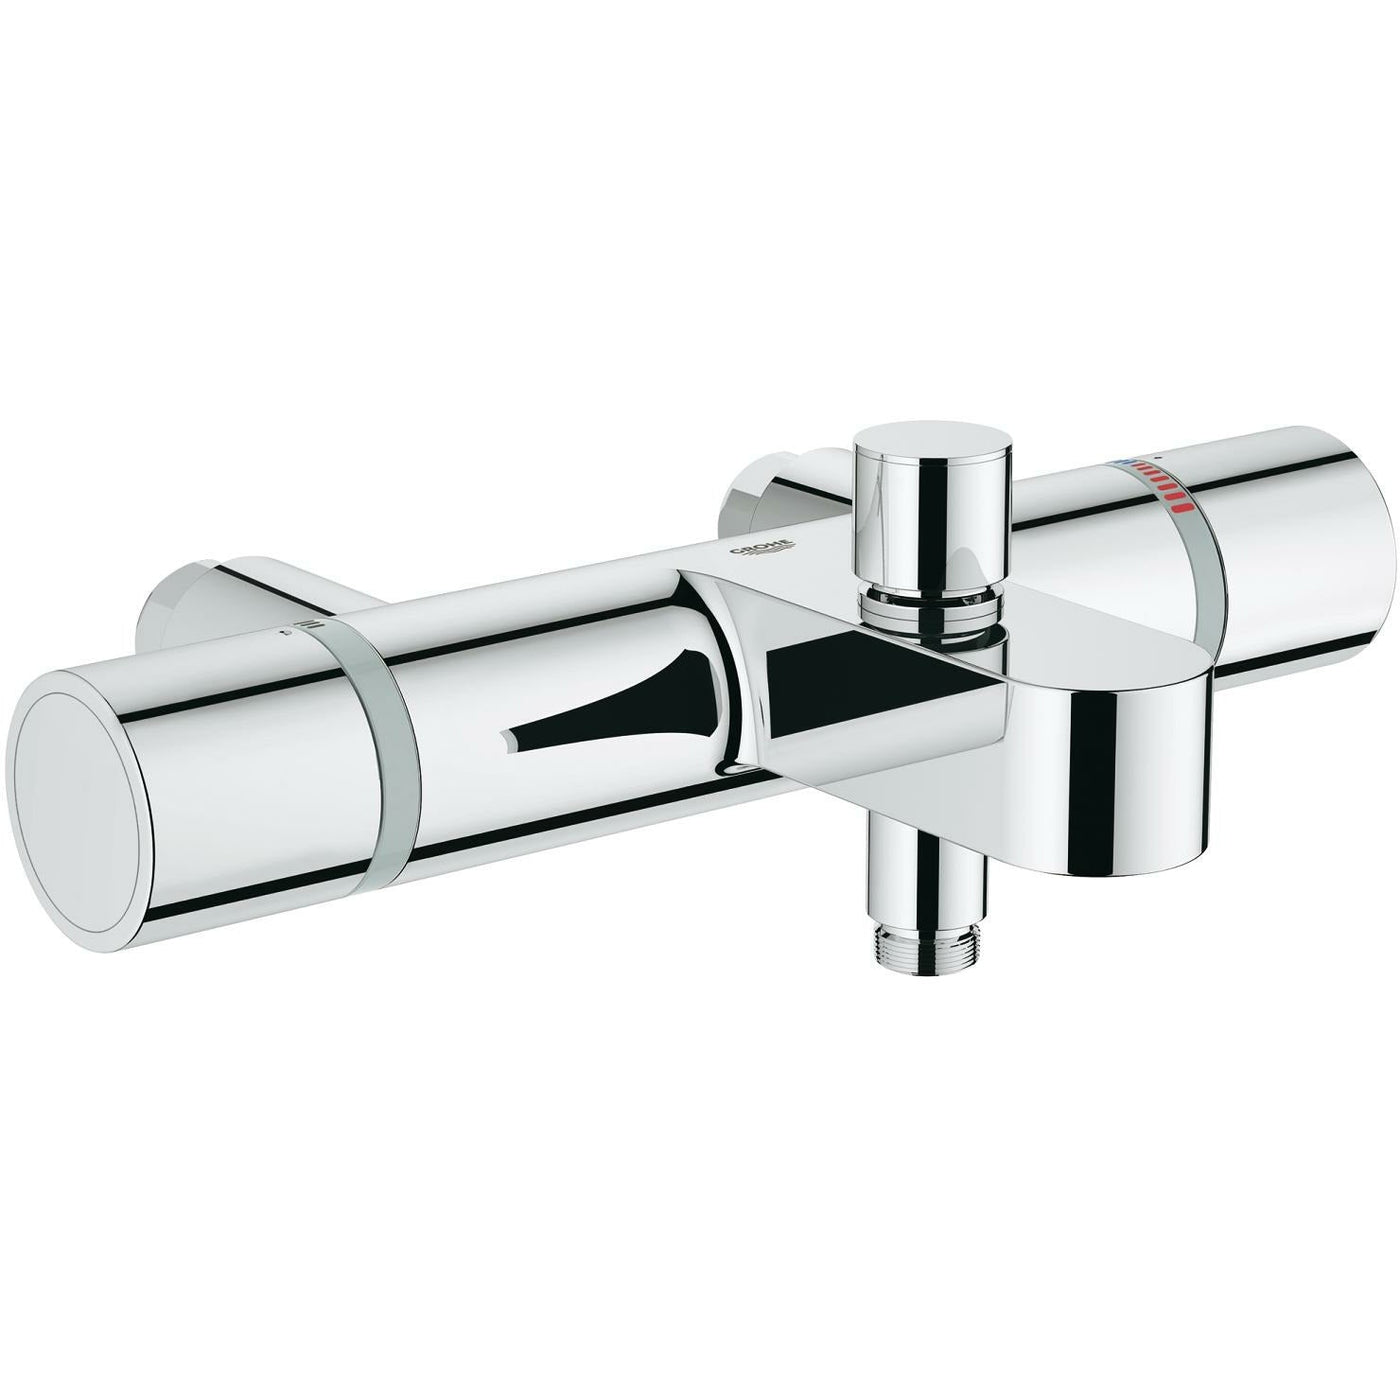 Grohe Wall Mounted Chrome Grohtherm 1000 Cosmopolitan Thermostatic bath/shower mixer ﾽ" - Letta London - 